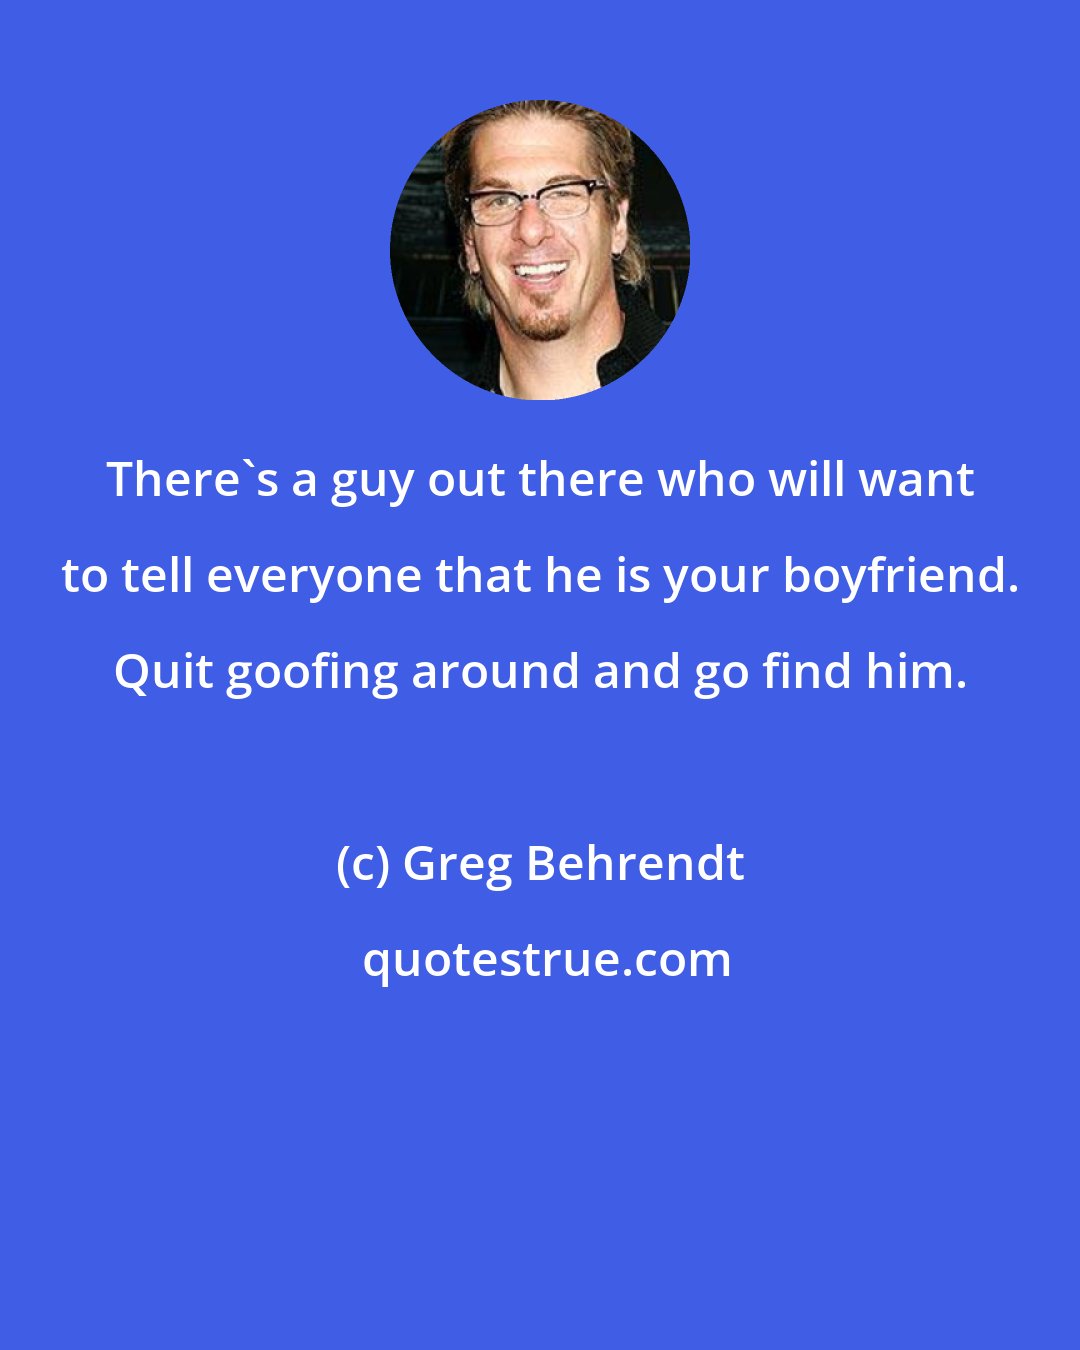 Greg Behrendt: There's a guy out there who will want to tell everyone that he is your boyfriend. Quit goofing around and go find him.